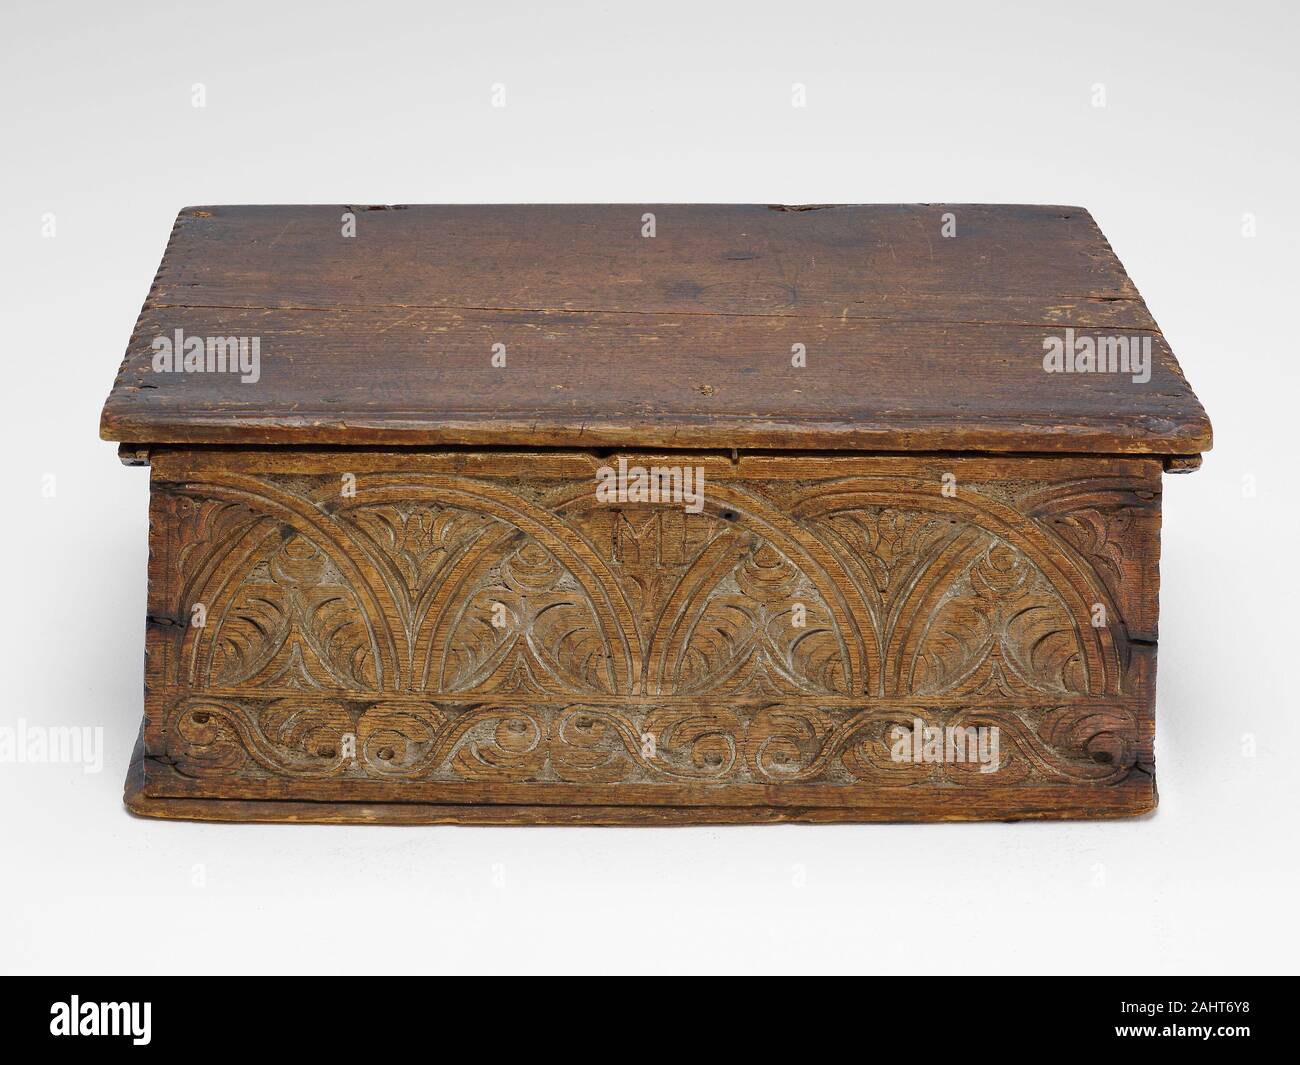 Artist unknown. Box. 1650–1700. Eastern Massachusetts. Red oak and white pine The most common object in a colonial home, a small, lidded rectangular storage box would have held personal articles, such as household items, writing implements, or a Bible. They were decorated simply, usually only on the front, with stylized plants or vegetation and geometric lines. The Art Institute’s box is segmented by an upper band of intersecting lunettes with intervening foliate leaves and a lower border with repeating floral S-scrolls. The initials M P, carved in the center of the box, are presumably those o Stock Photo